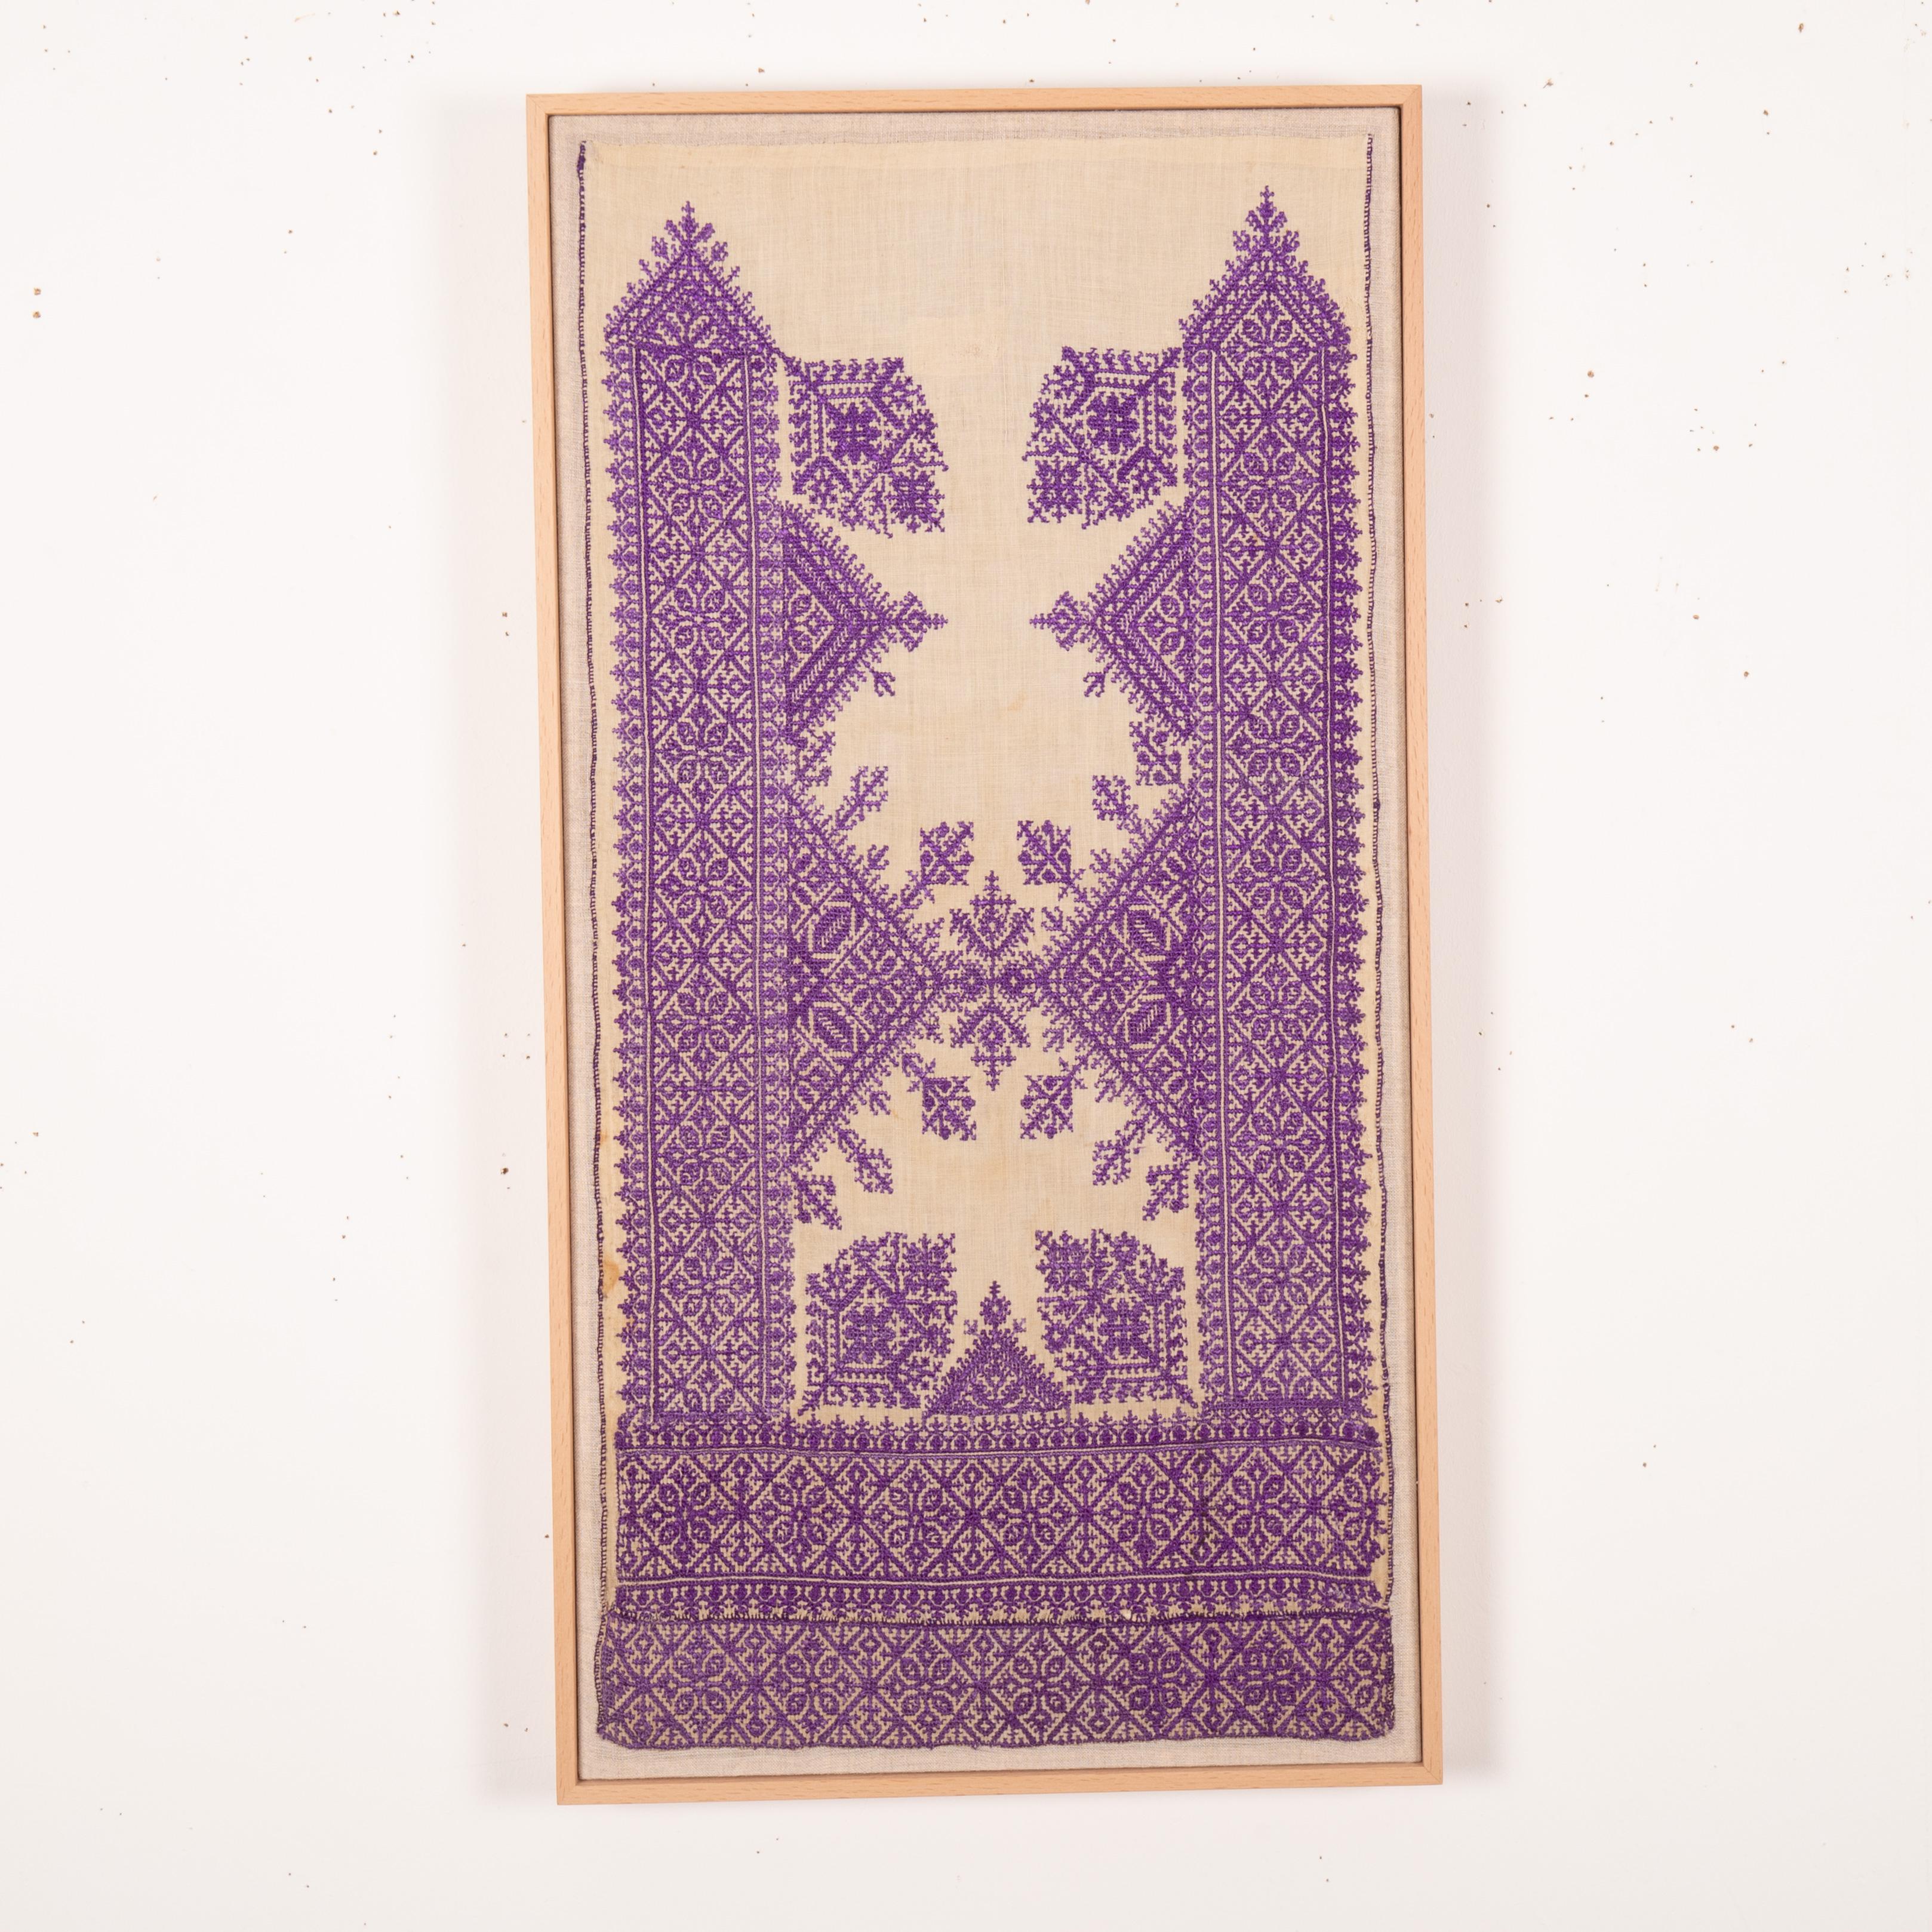 Professionally backed and framed fez embroidery fragment from Morocco.
Early 20th century.